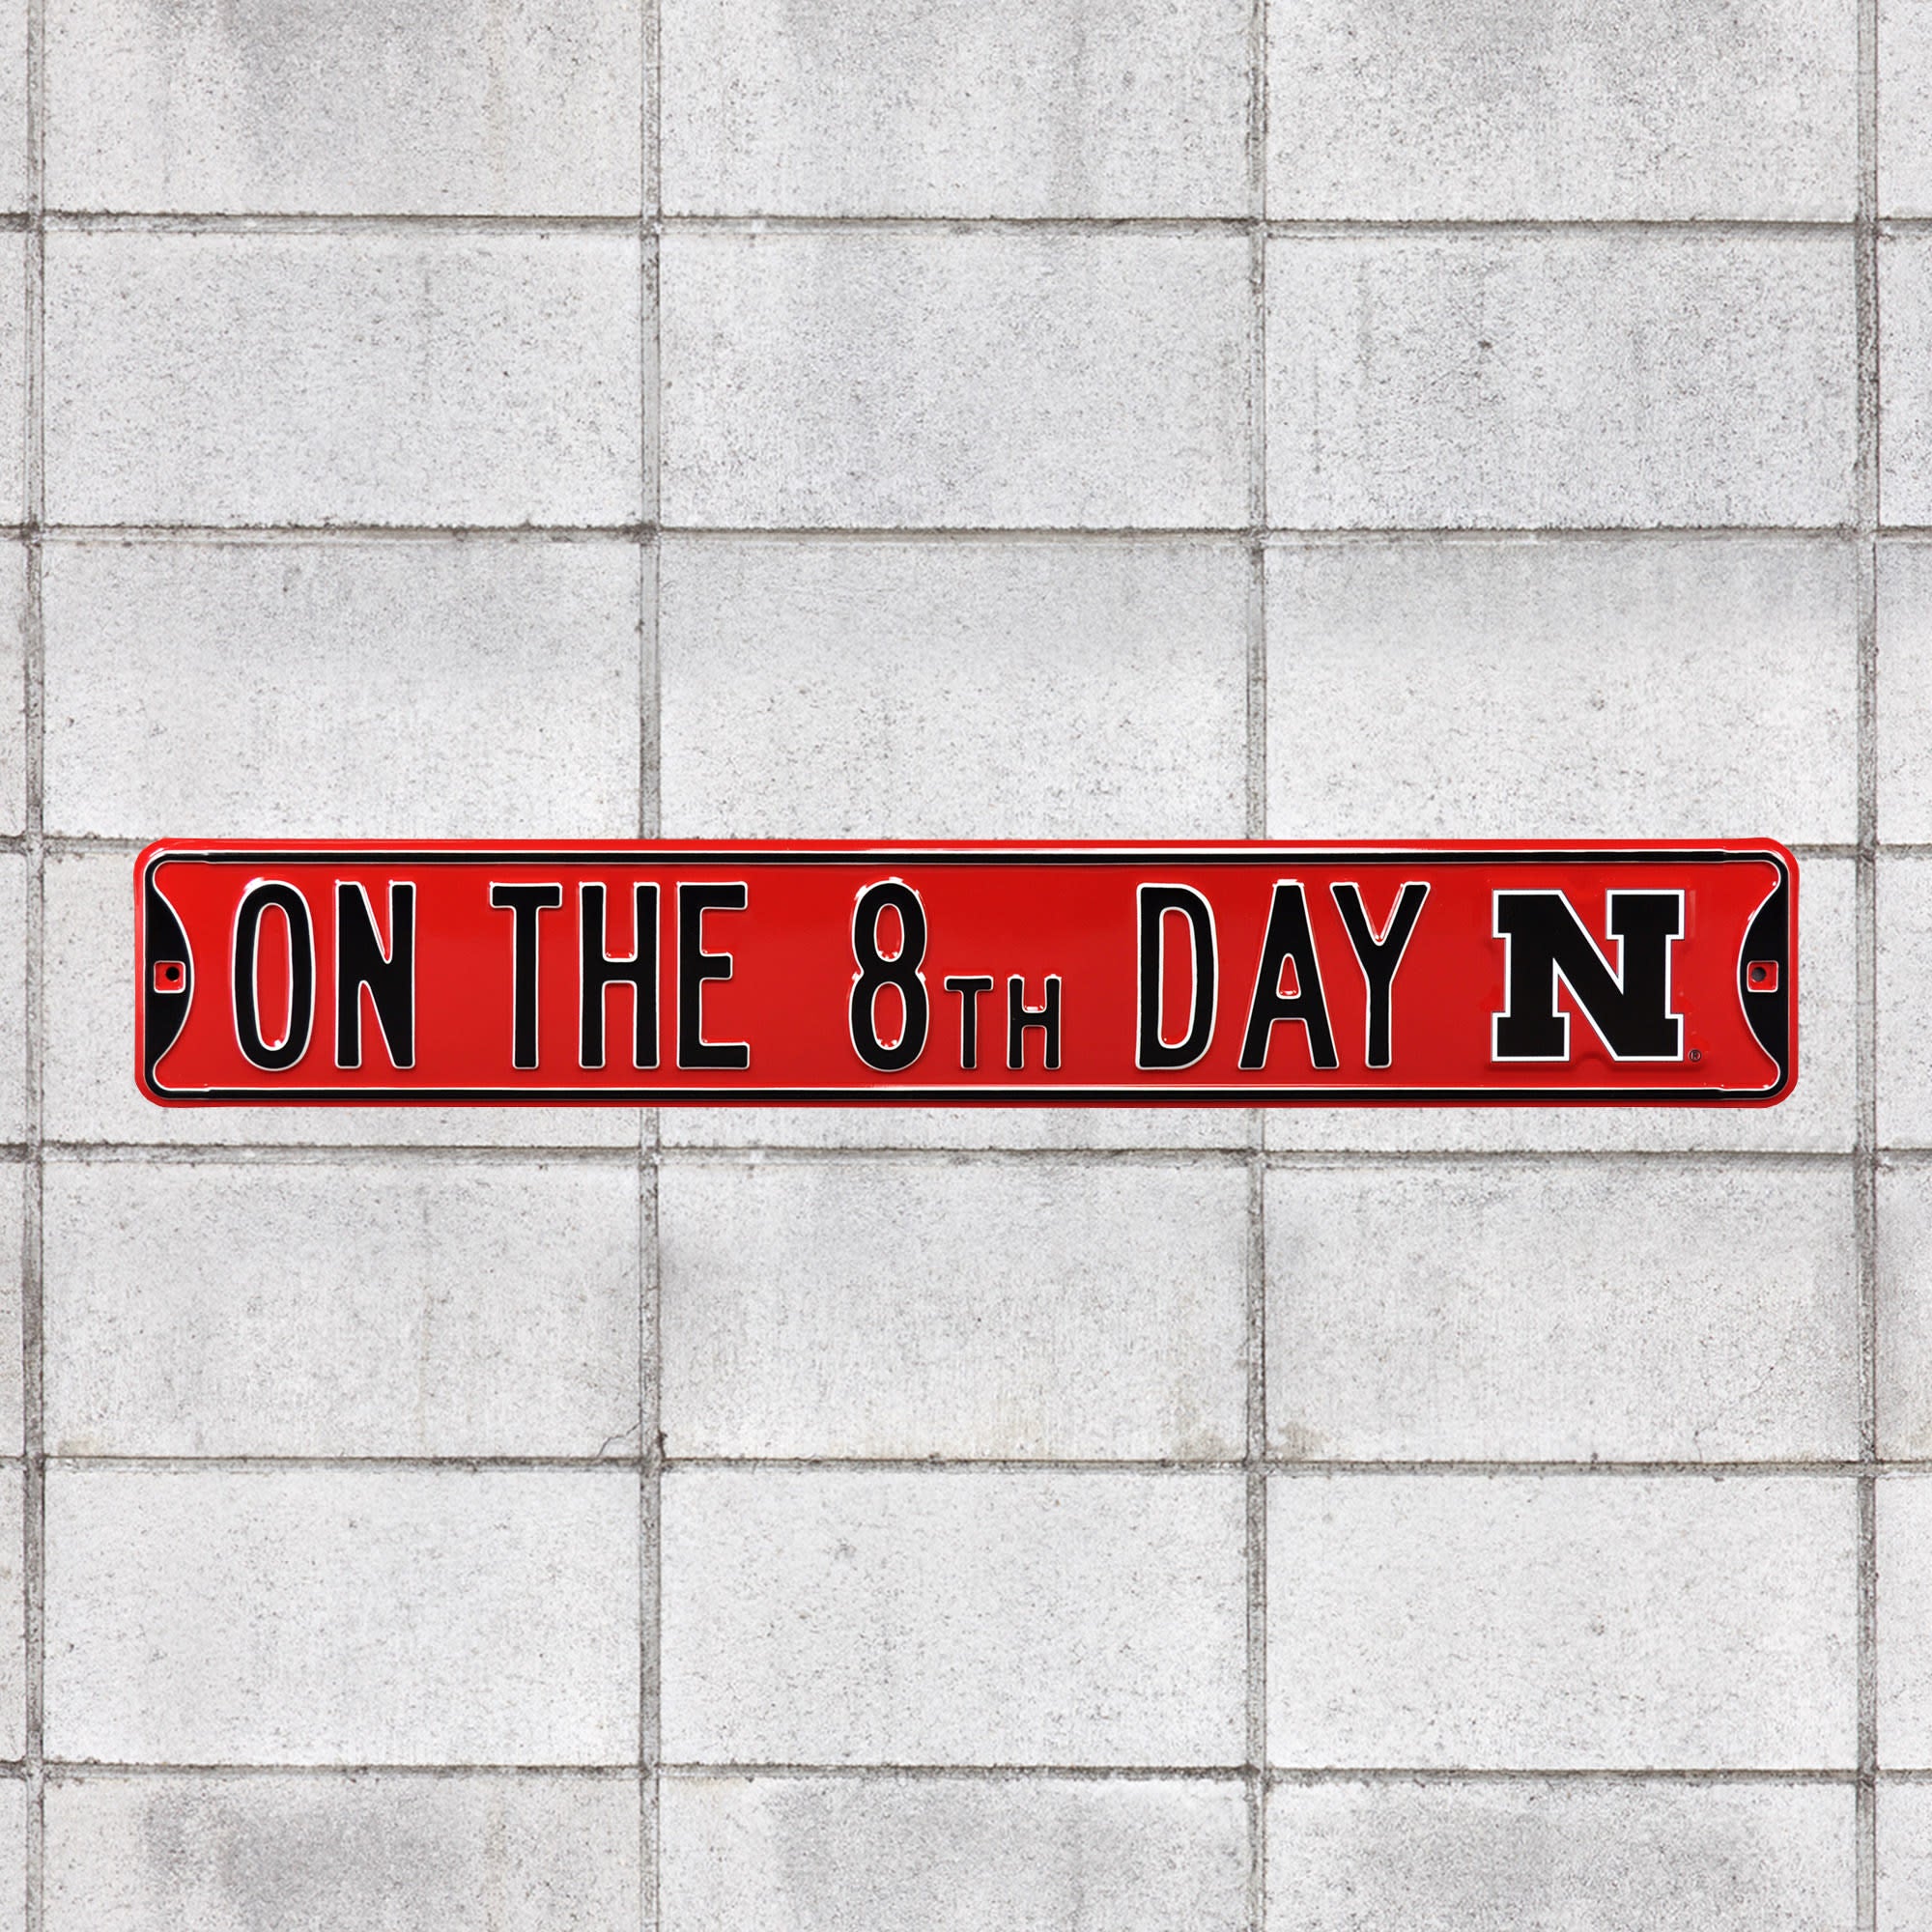 Nebraska Cornhuskers: On The 8th Day - Officially Licensed Metal Street Sign 36.0"W x 6.0"H by Fathead | 100% Steel